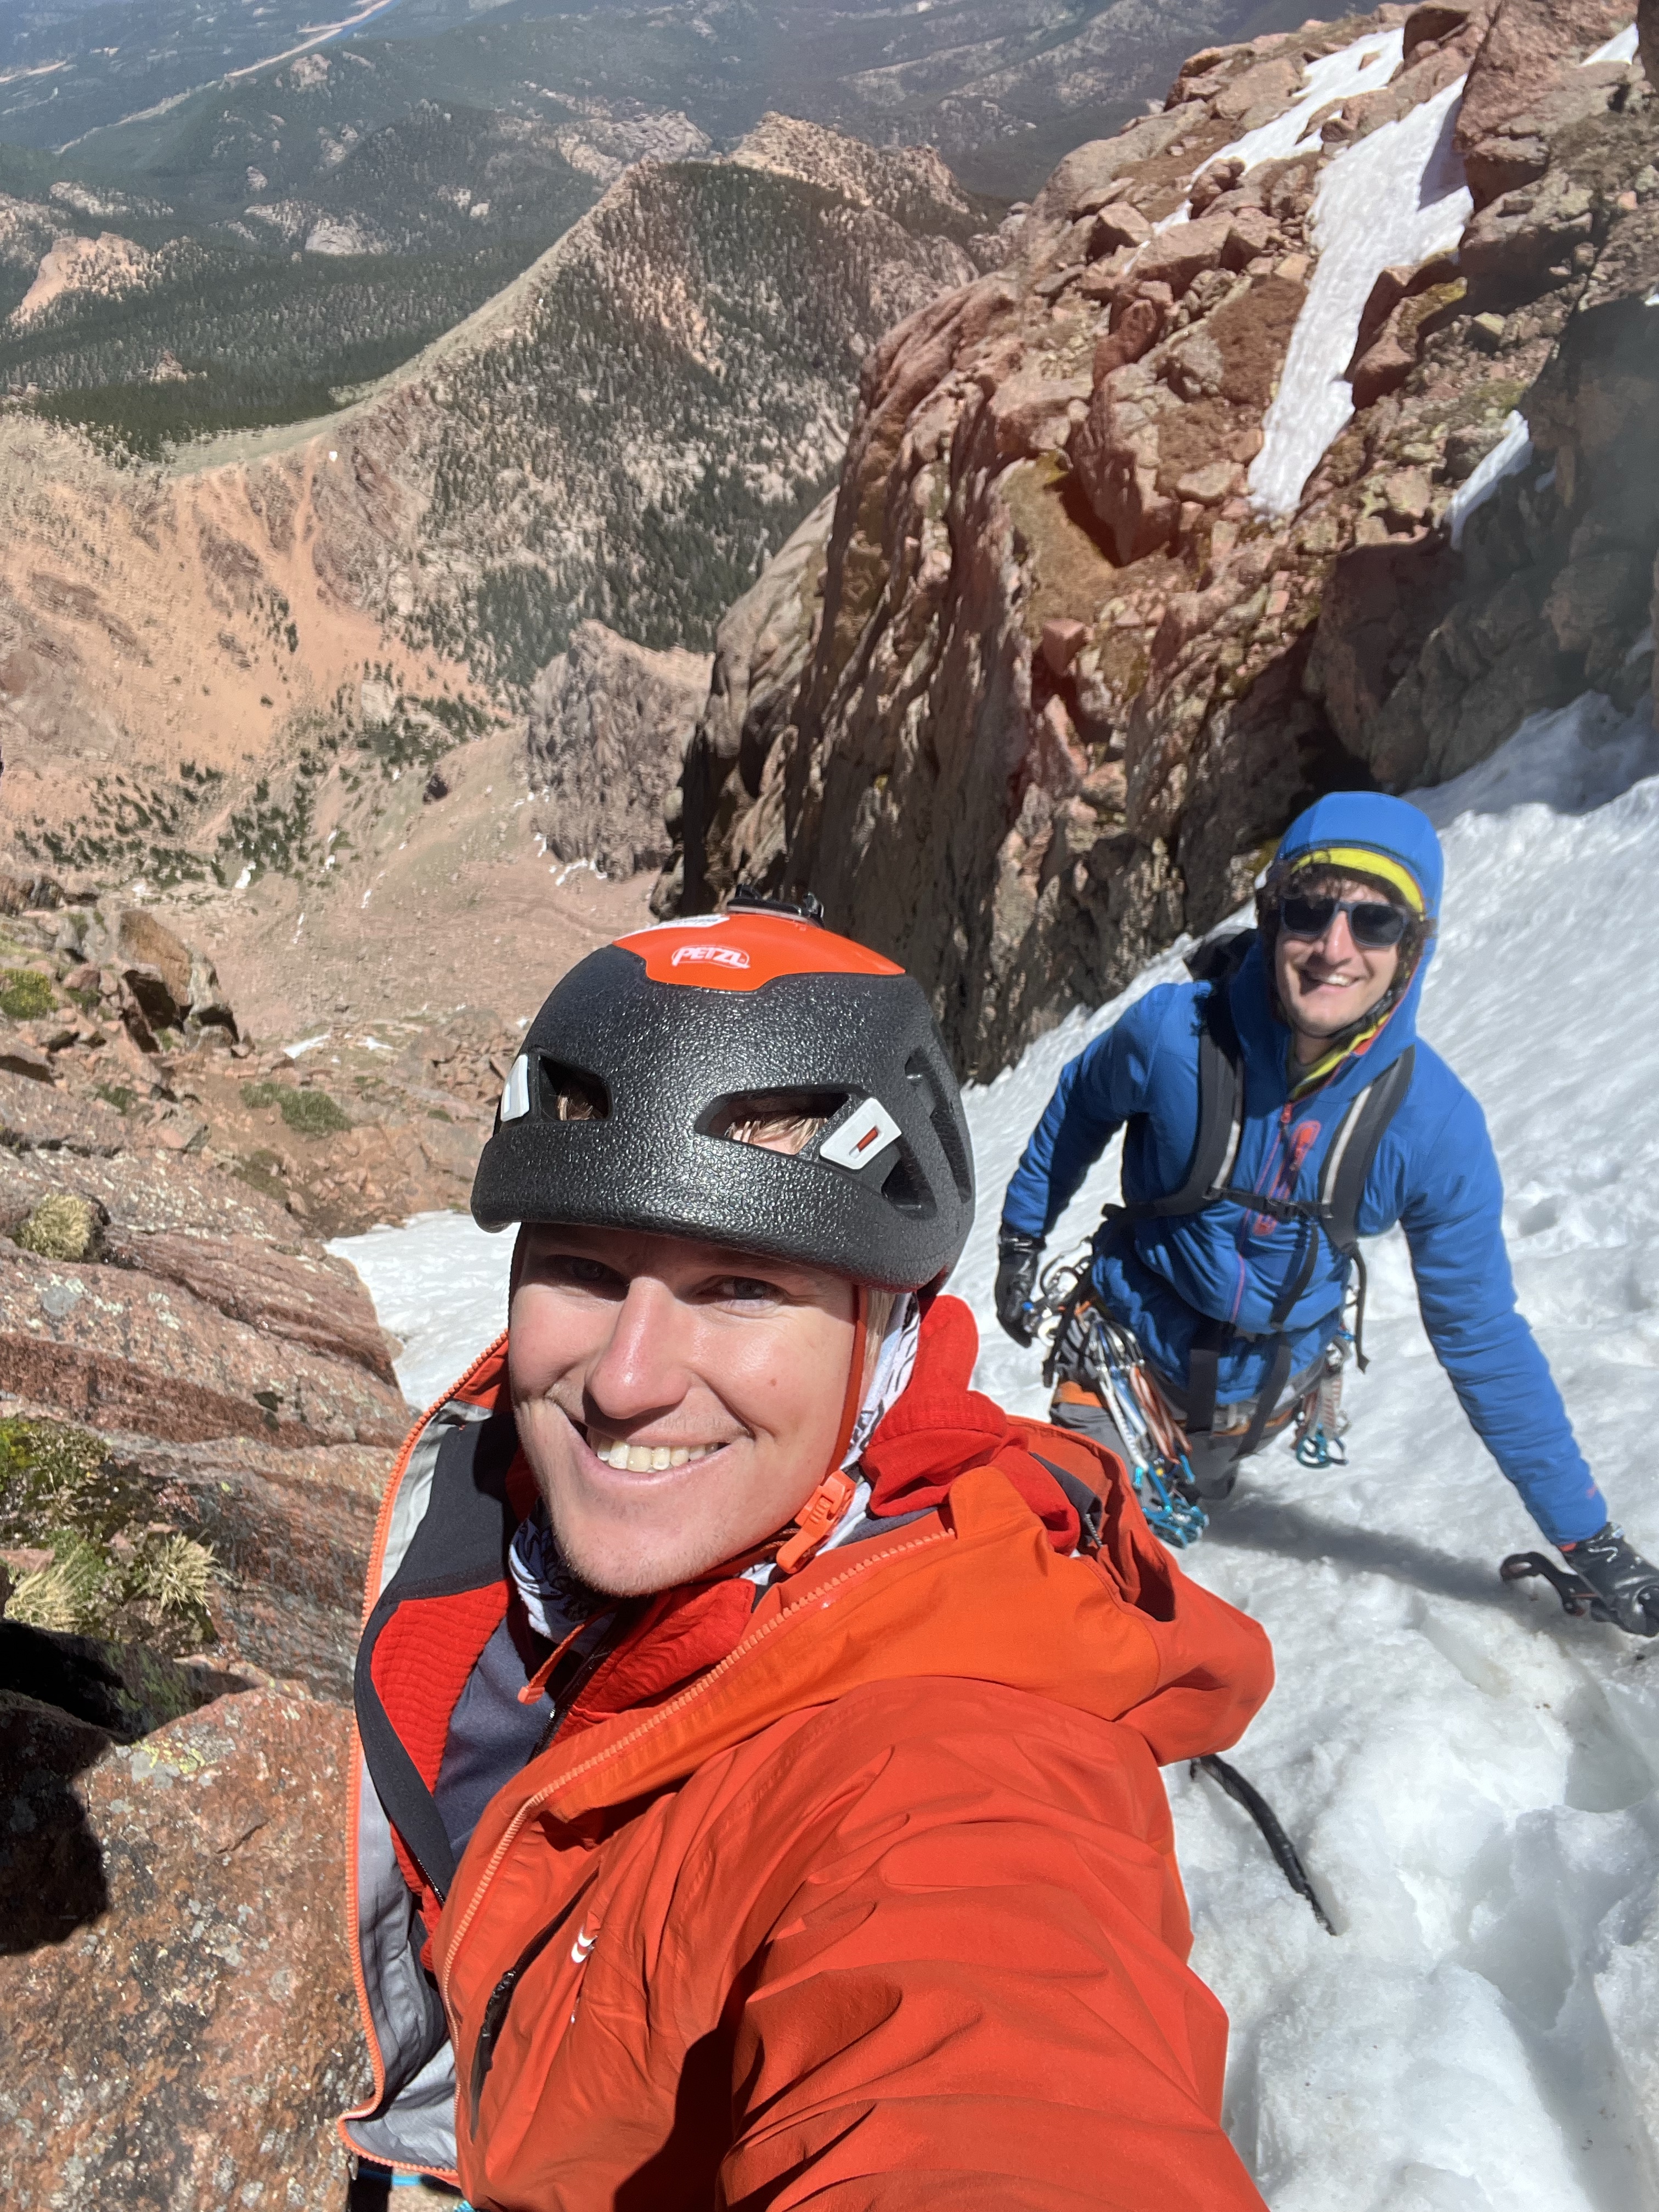 A selfie of two climbers in a snow gully. It is sunny, and they are climbing unroped on moderately steep terrain. The climber in the back wears the black Showa Temres 282-02 gloves for ice climbing. Both men smile at the camera.